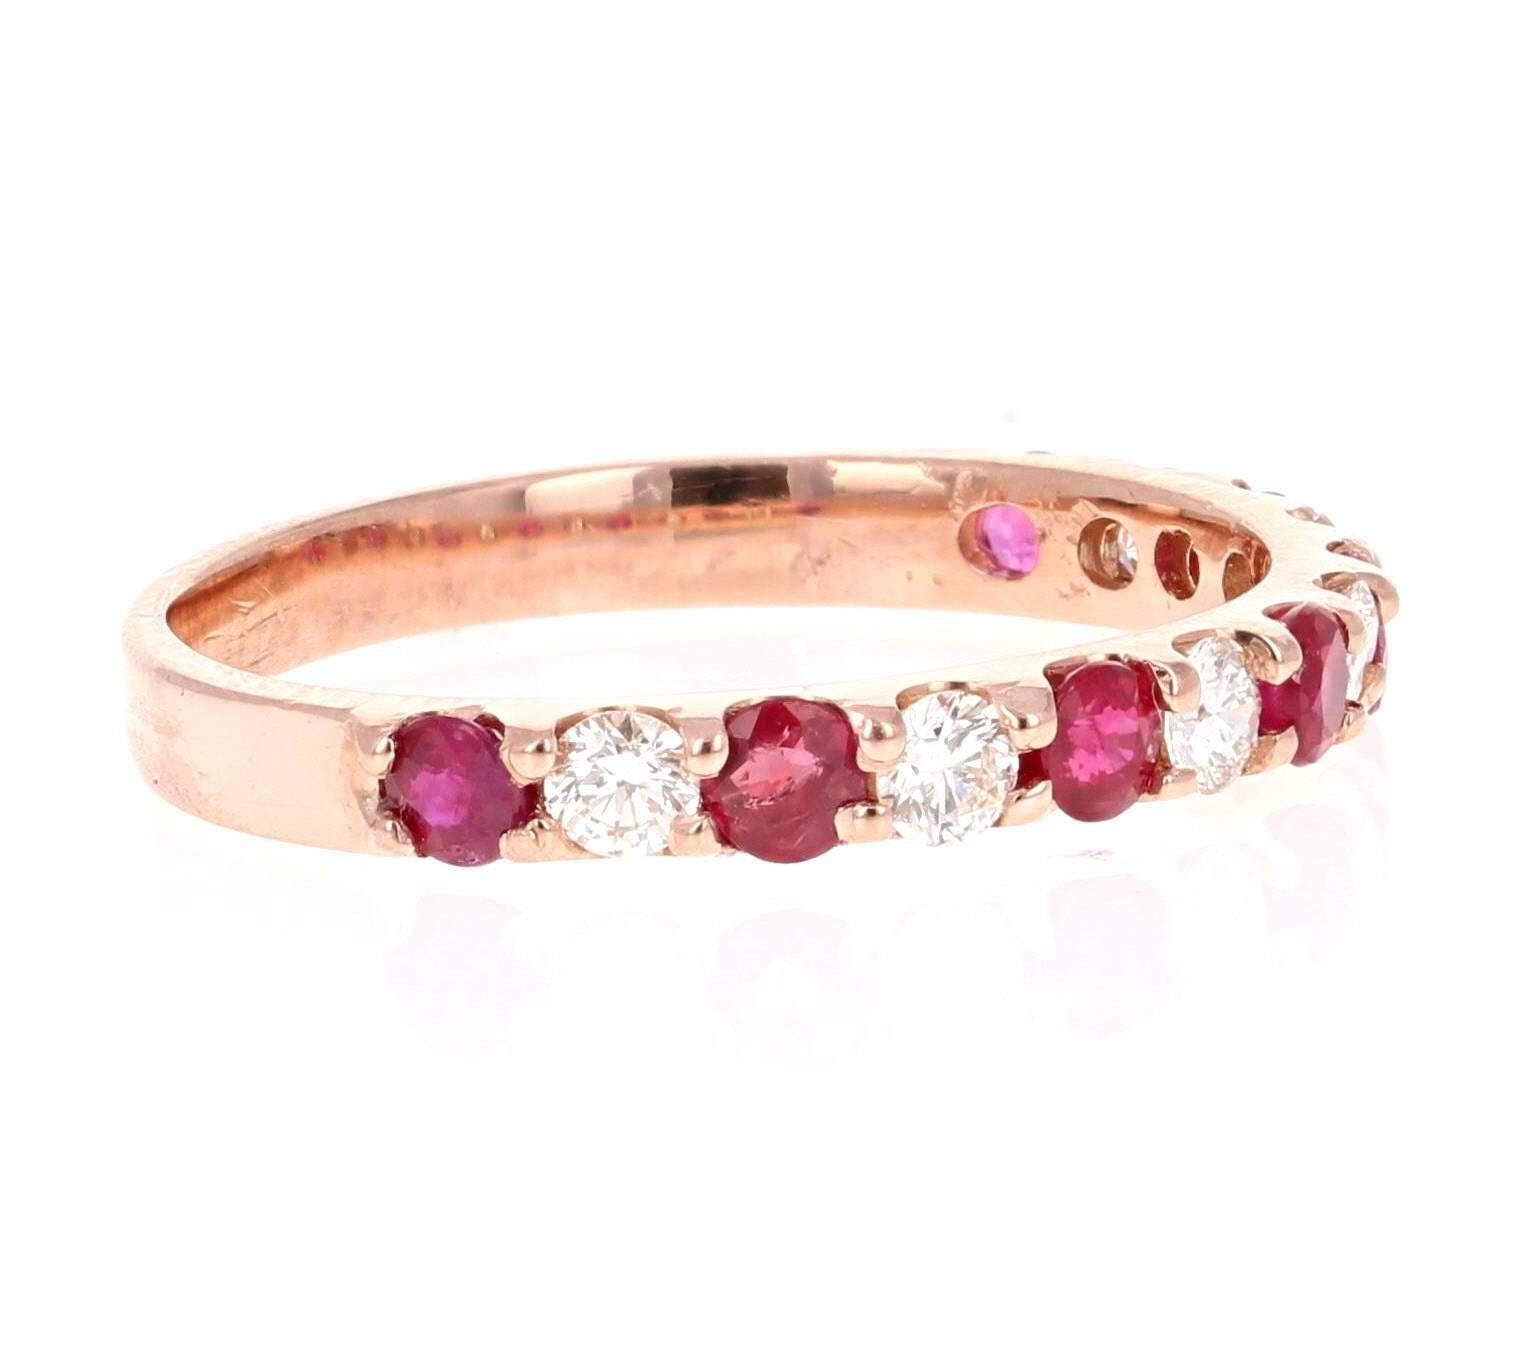 Diamond and Ruby Rose Gold Band!

Elegant and classy 0.86 Carat Diamond and Ruby band that is sure to be a great addition to your accessory collection!   There are 7 Round Cut Diamonds that weigh 0.36 carats and 7 Round Cut Rubies that weigh 0.50